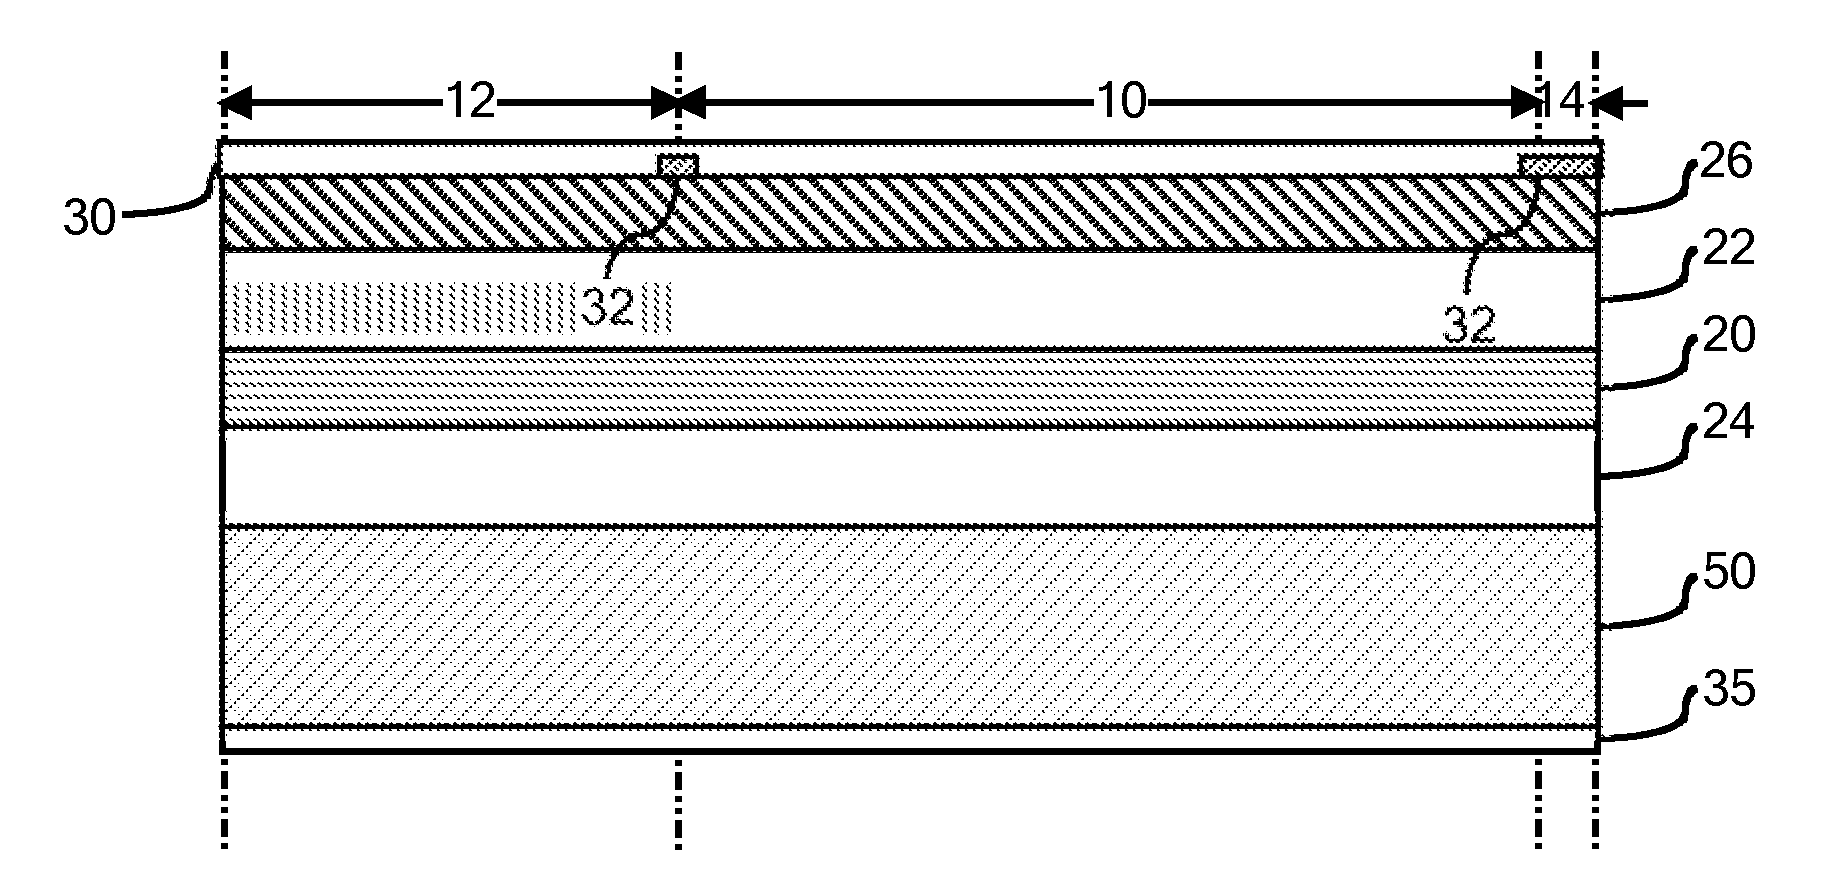 P-type isolation regions adjacent to semiconductor laser facets